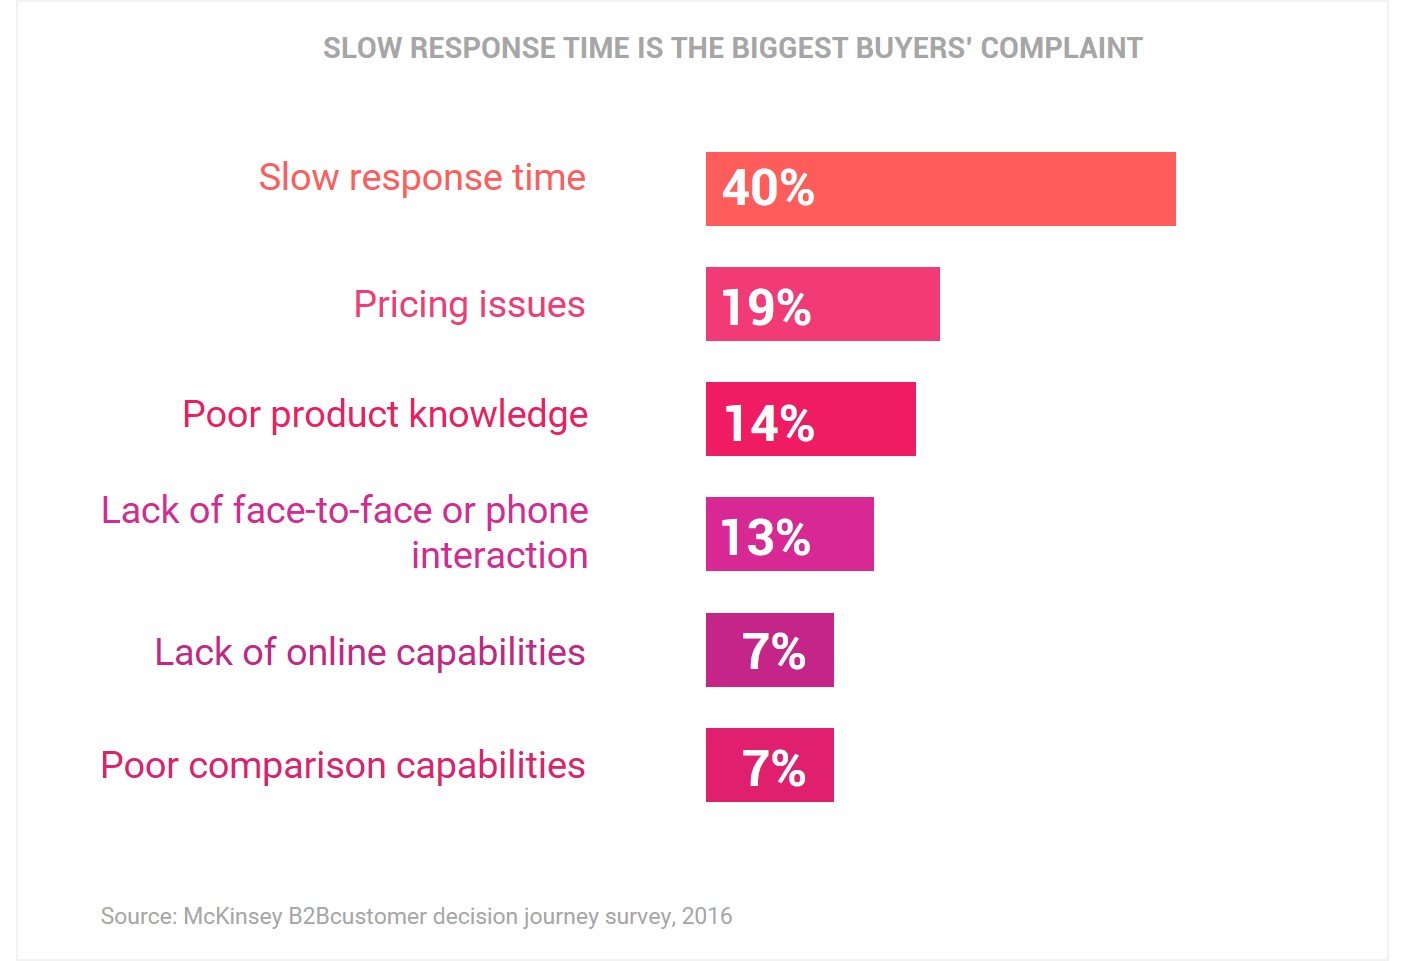 SLOW RESPONSE TIME IS THE BIGGEST BUYERS’ COMPLAINT